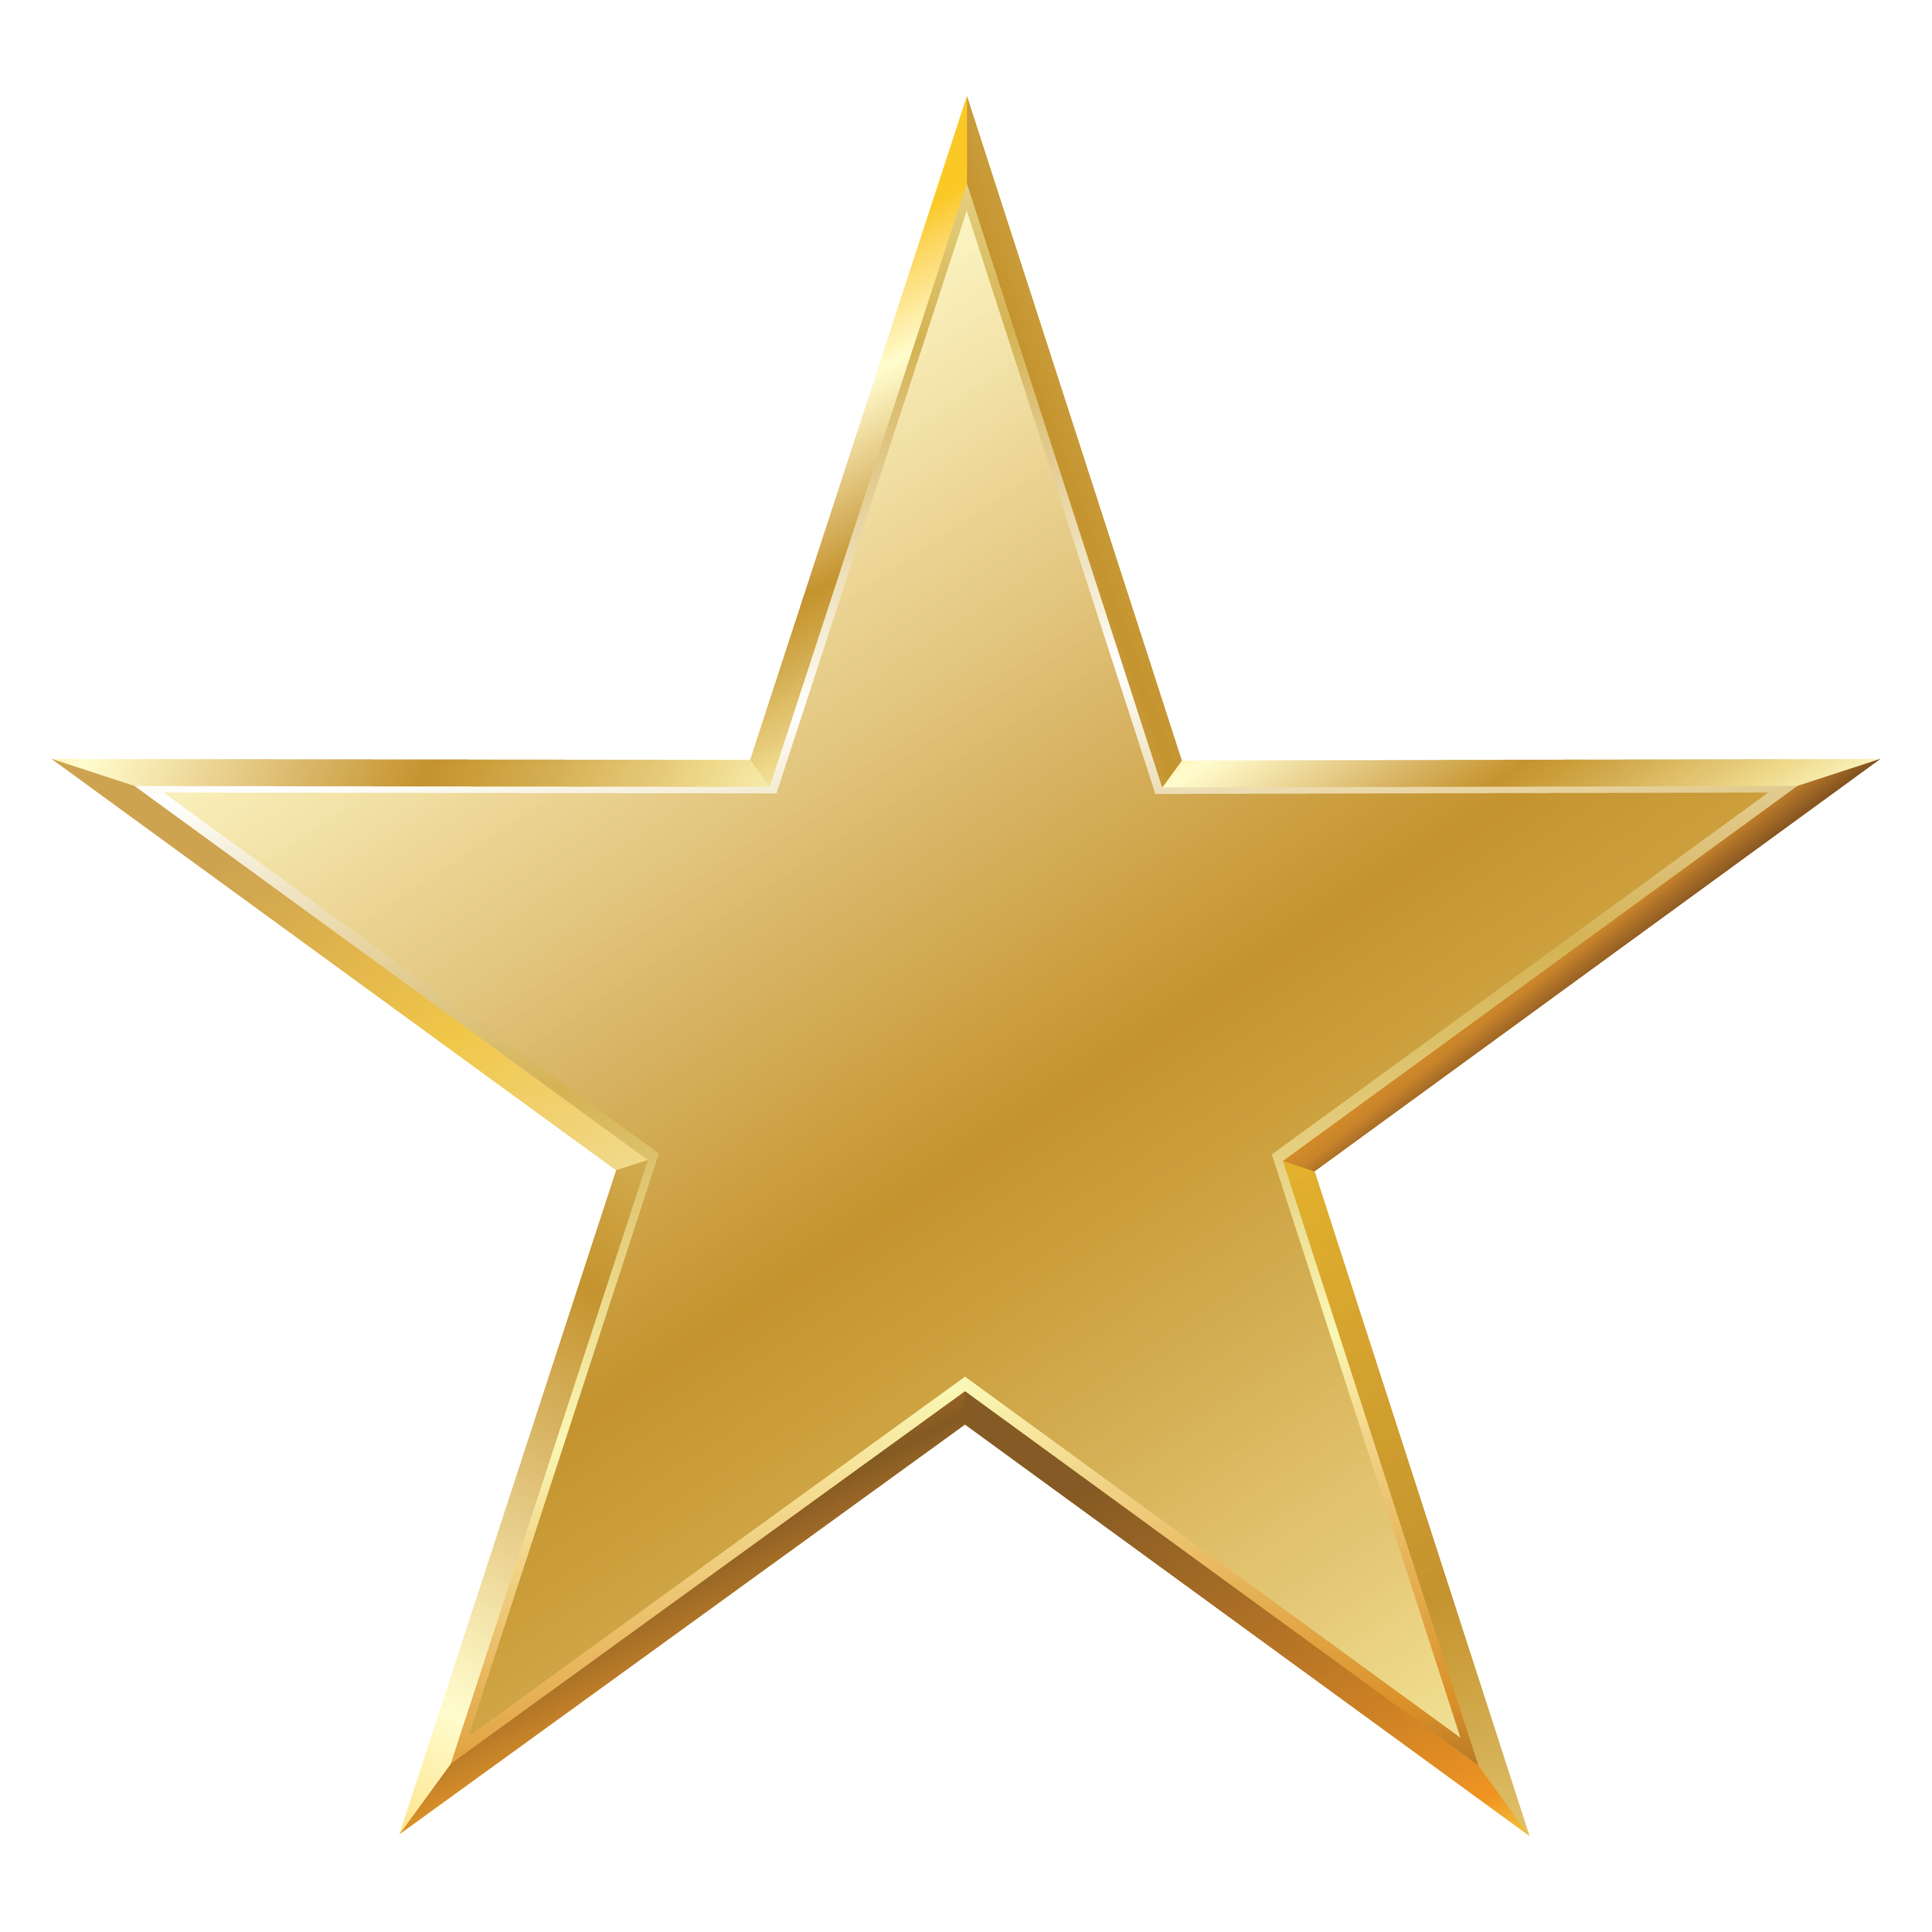 Star Gold Clip art - gold star png download - 3400*3400 - Free